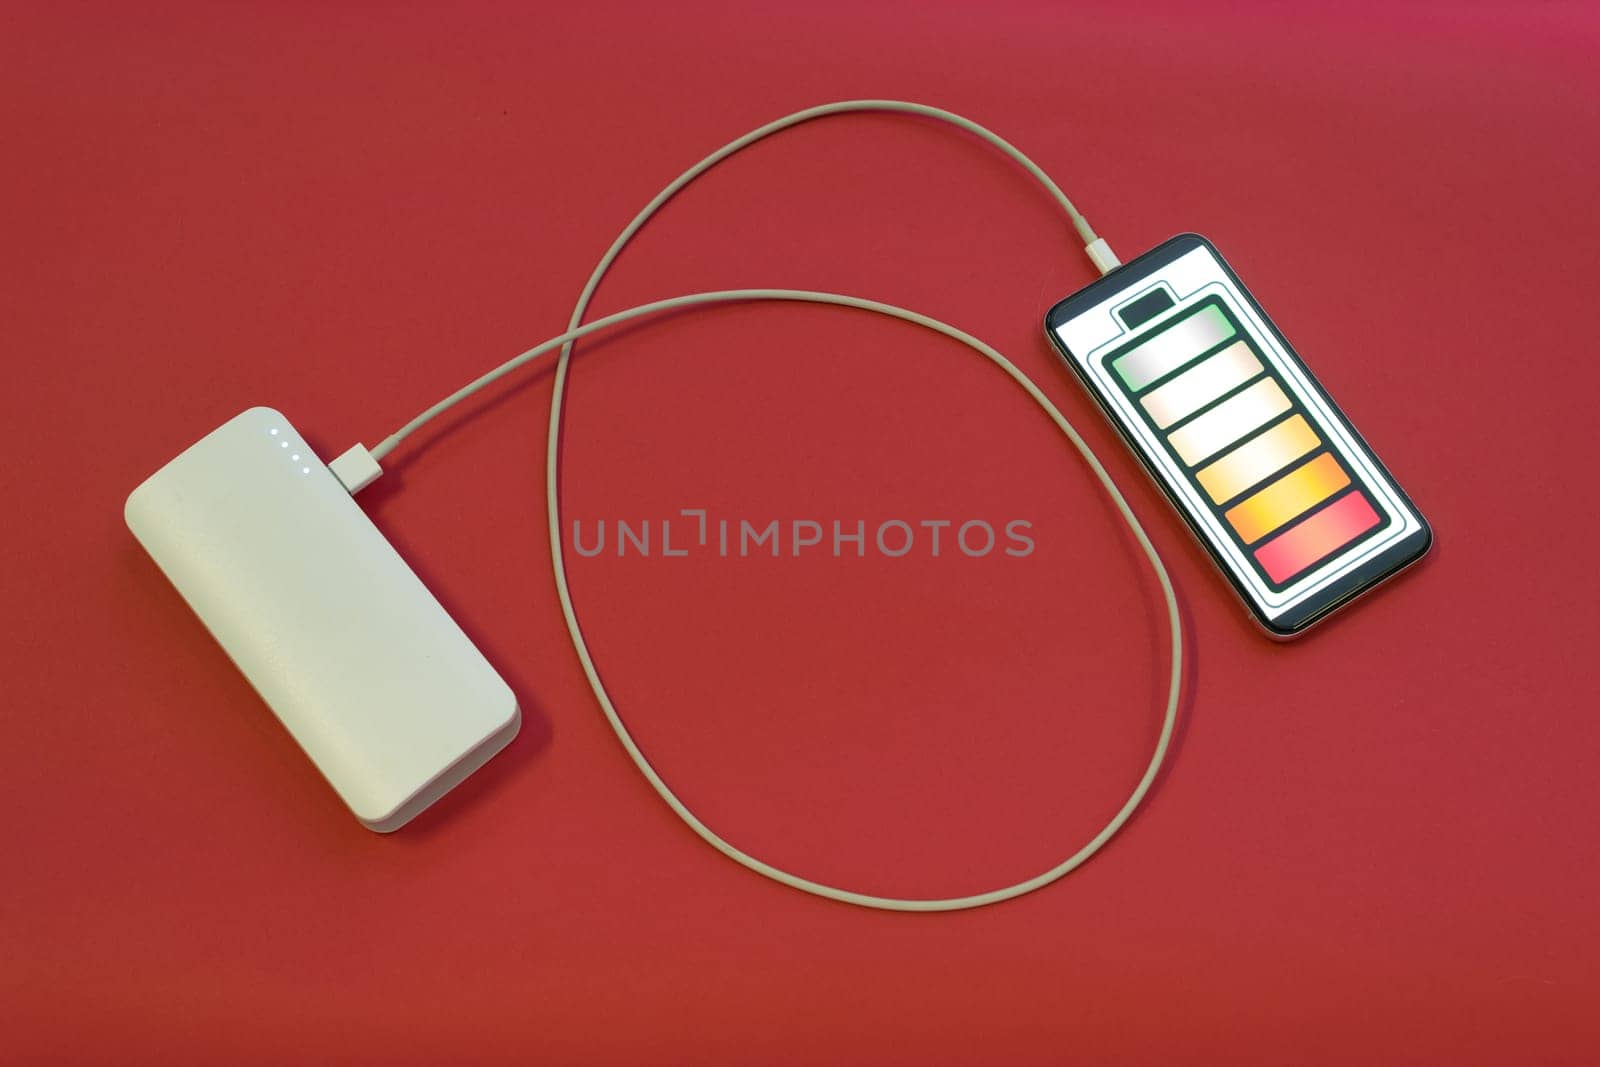 Smartphone is charging with power bank on red background - image